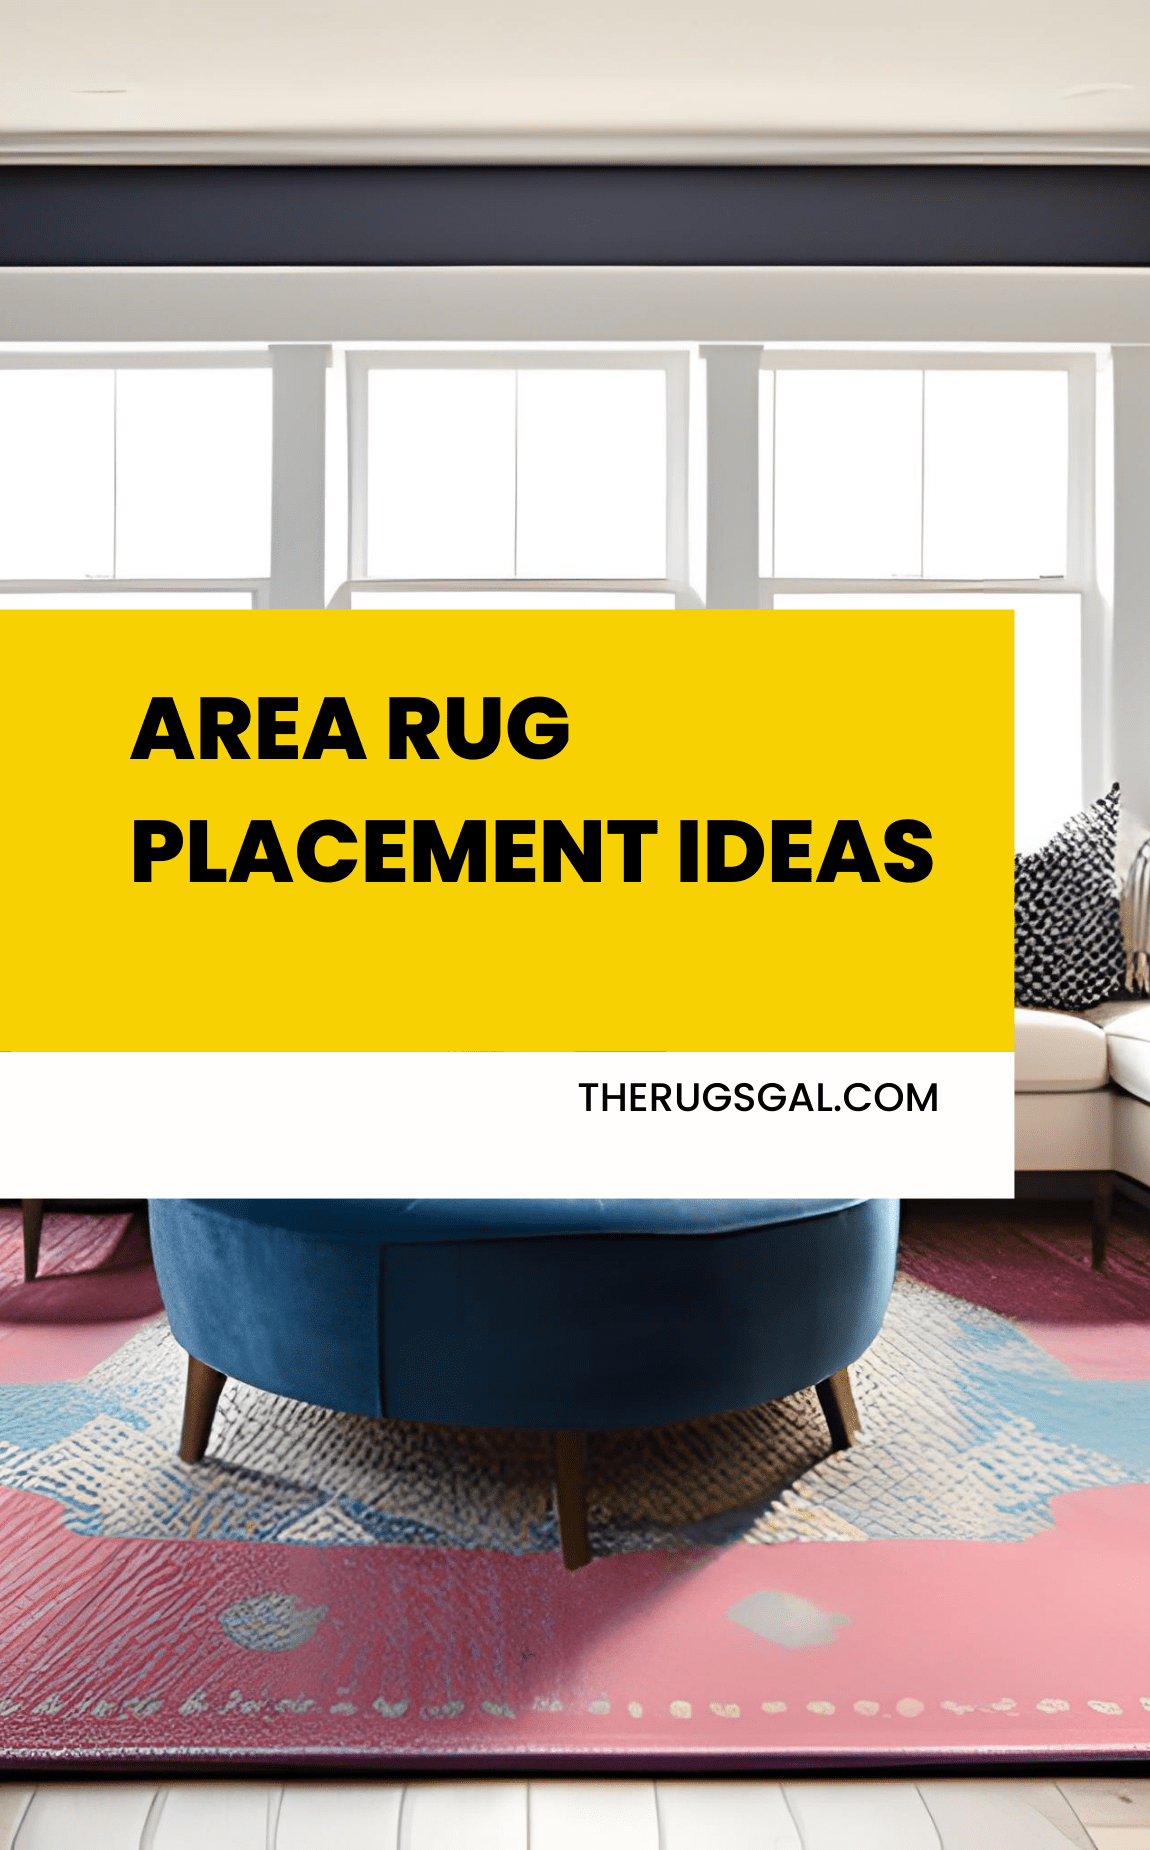 Area Rug Placement Ideas